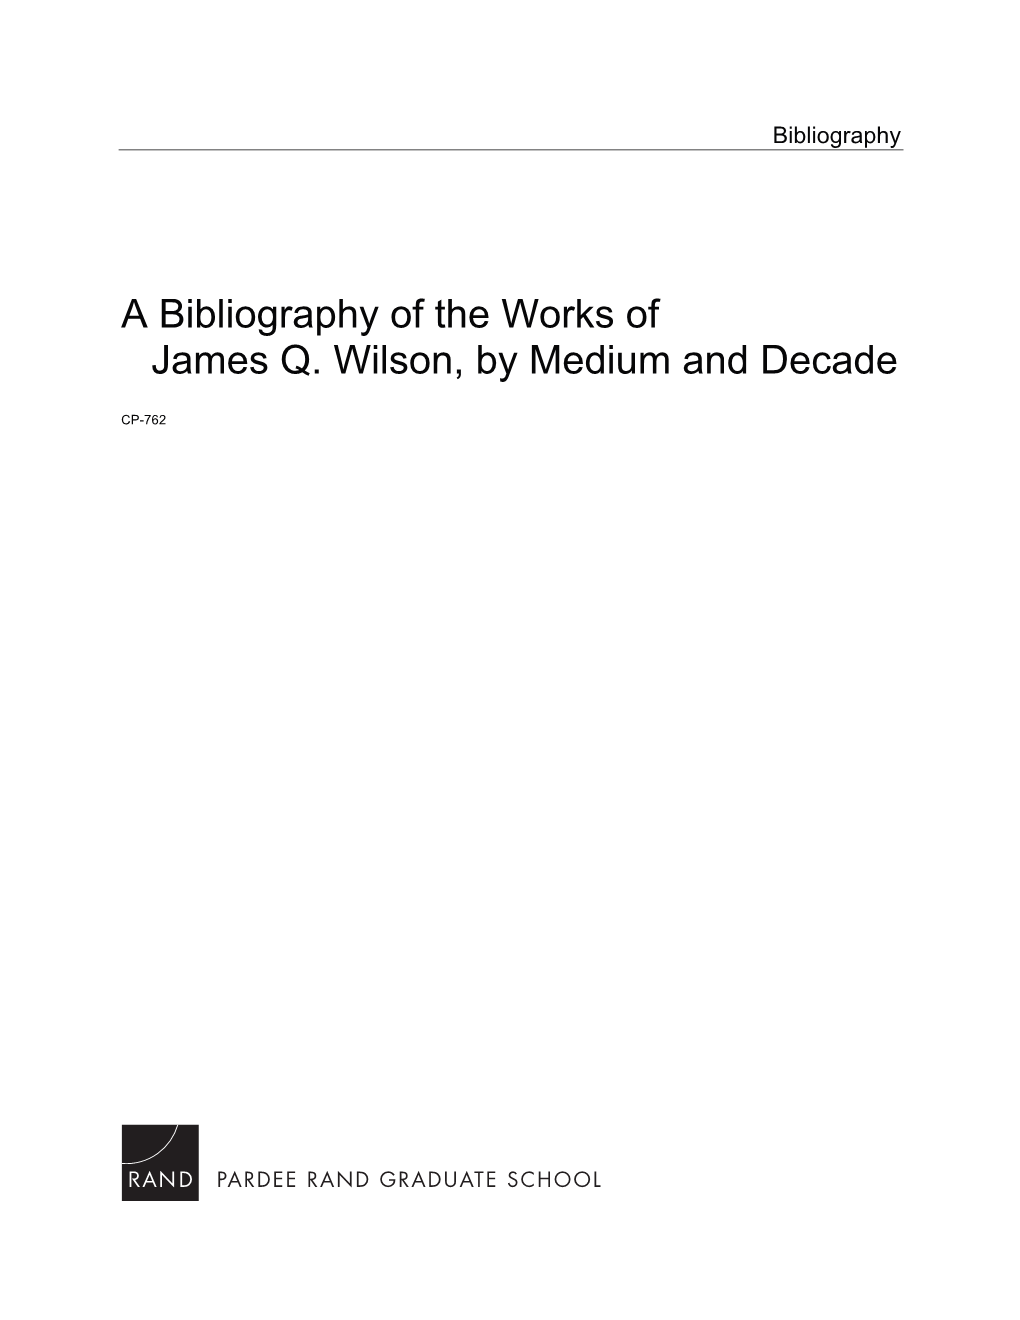 A Bibliography of the Works of James Q. Wilson, by Medium and Decade